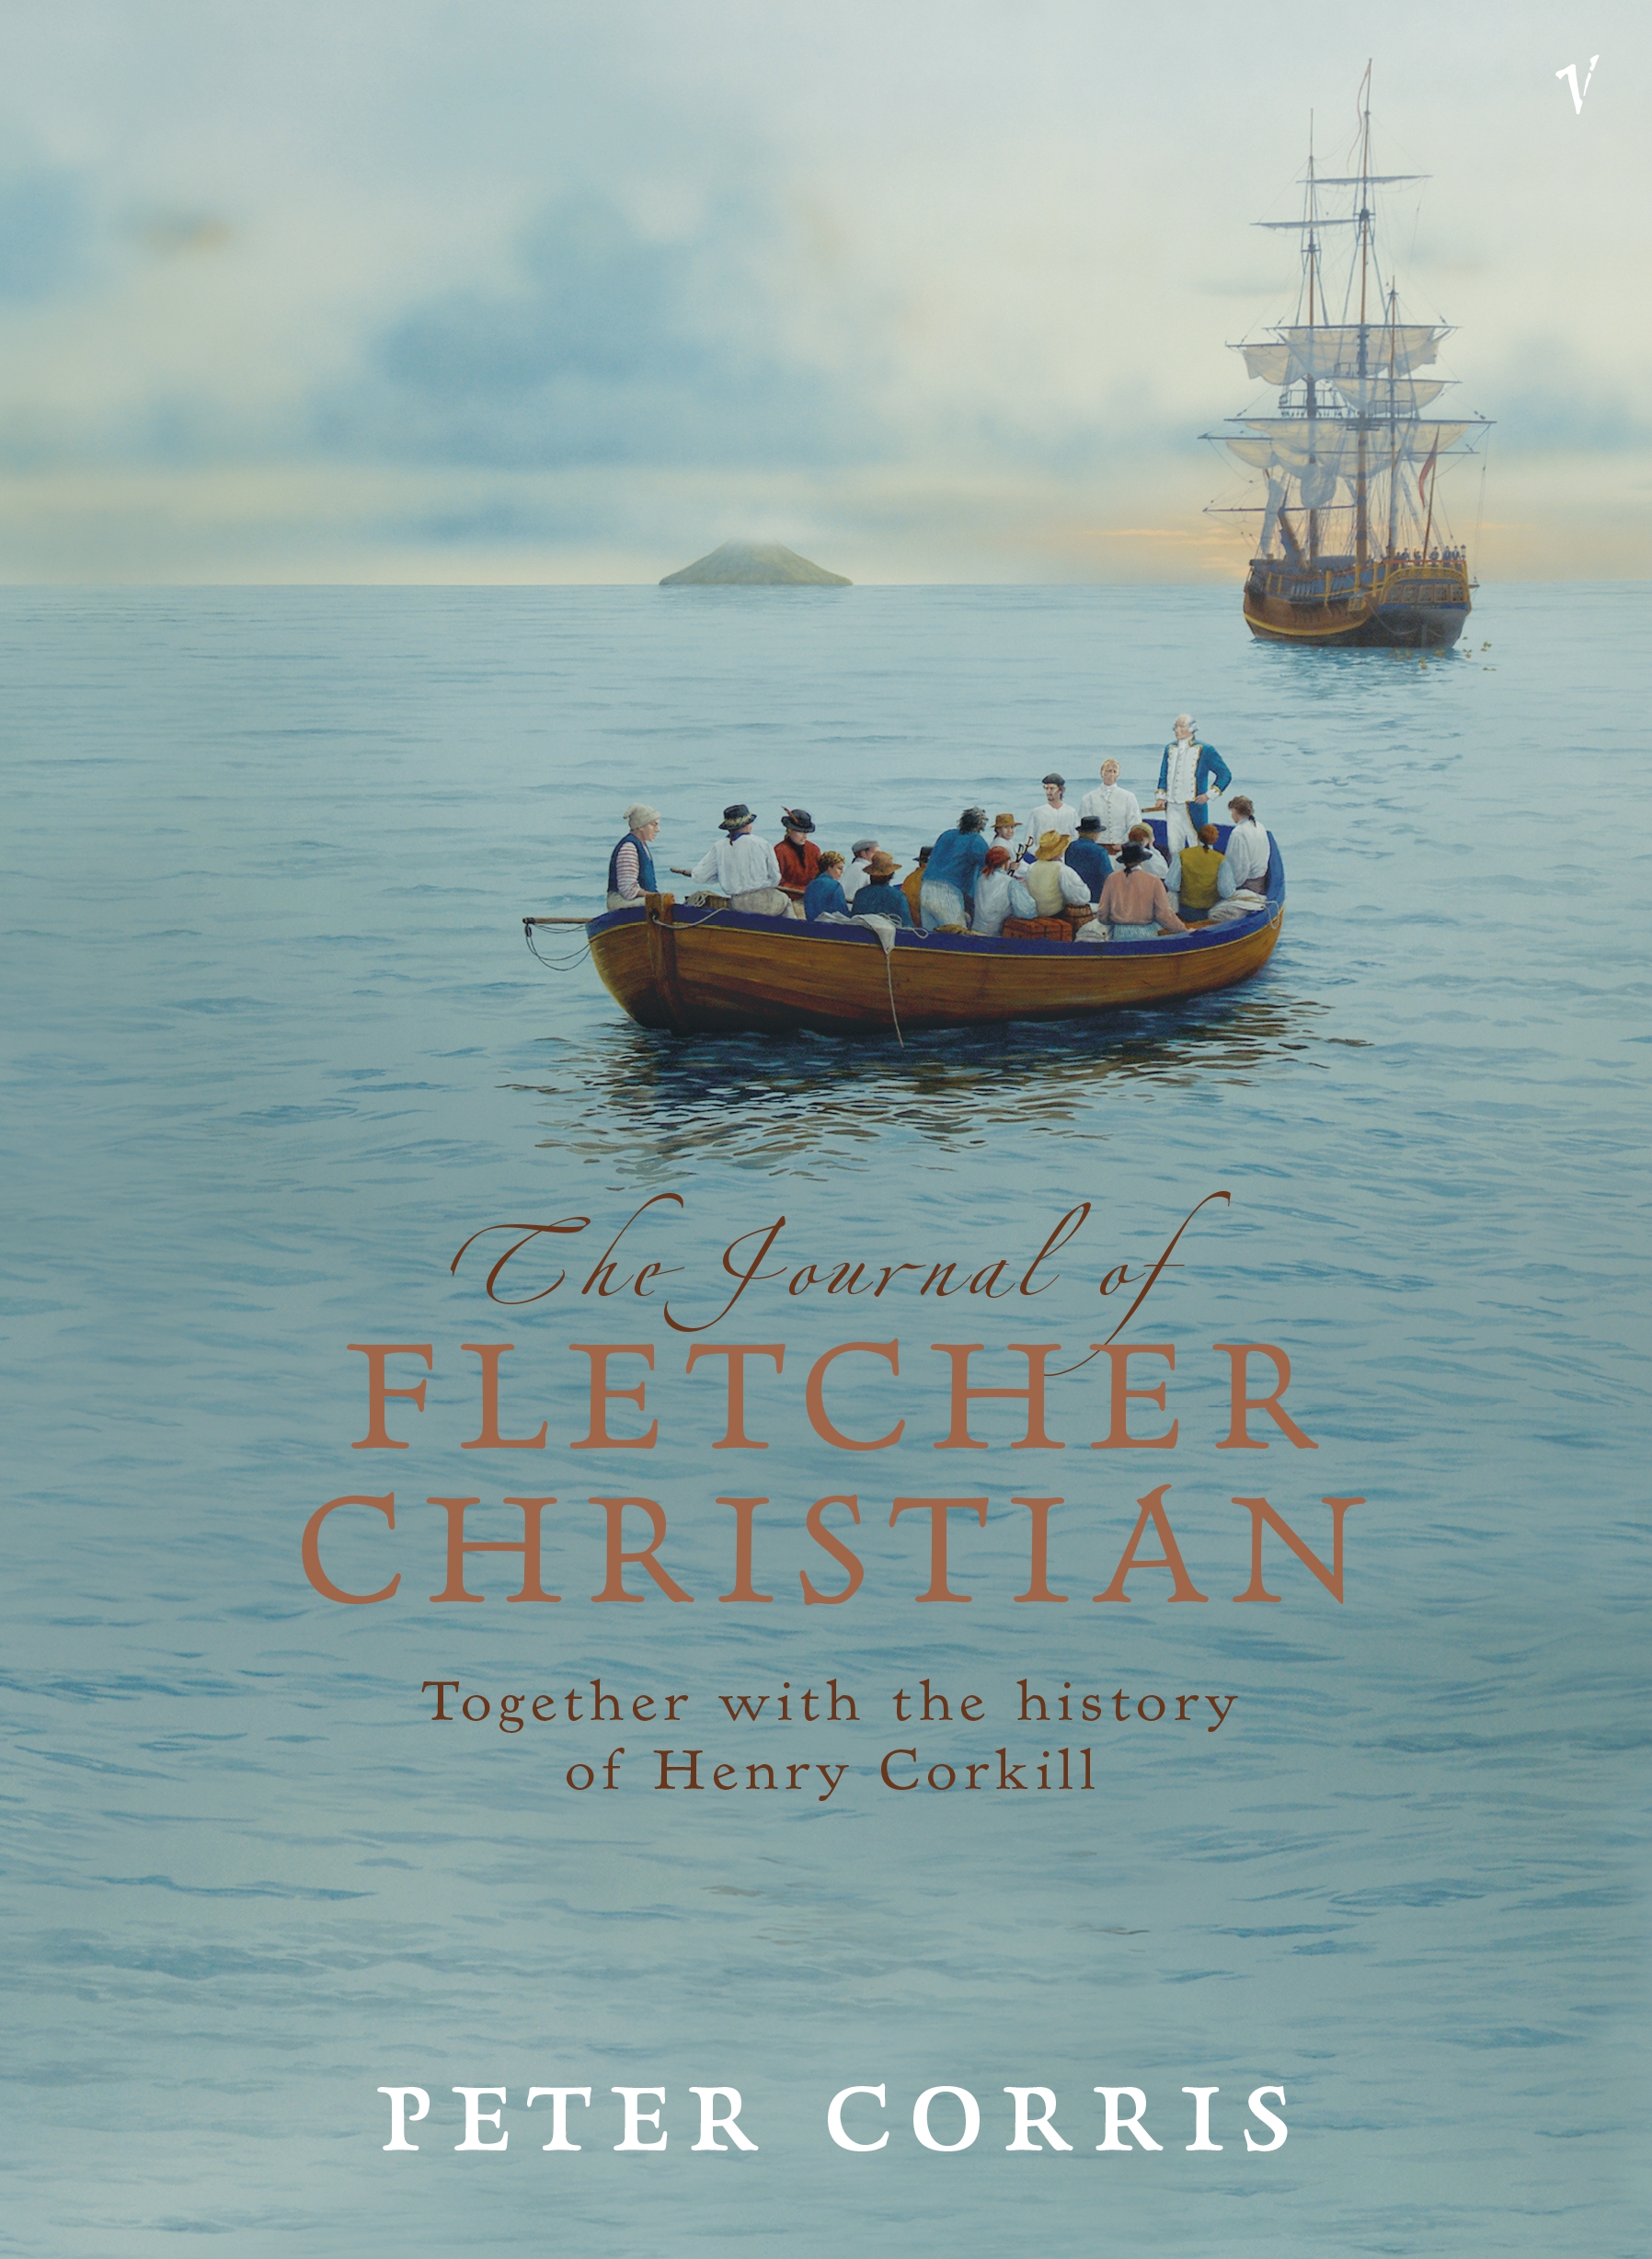 The Journal of Fletcher Christian: Together with the history of Henry Corkhill